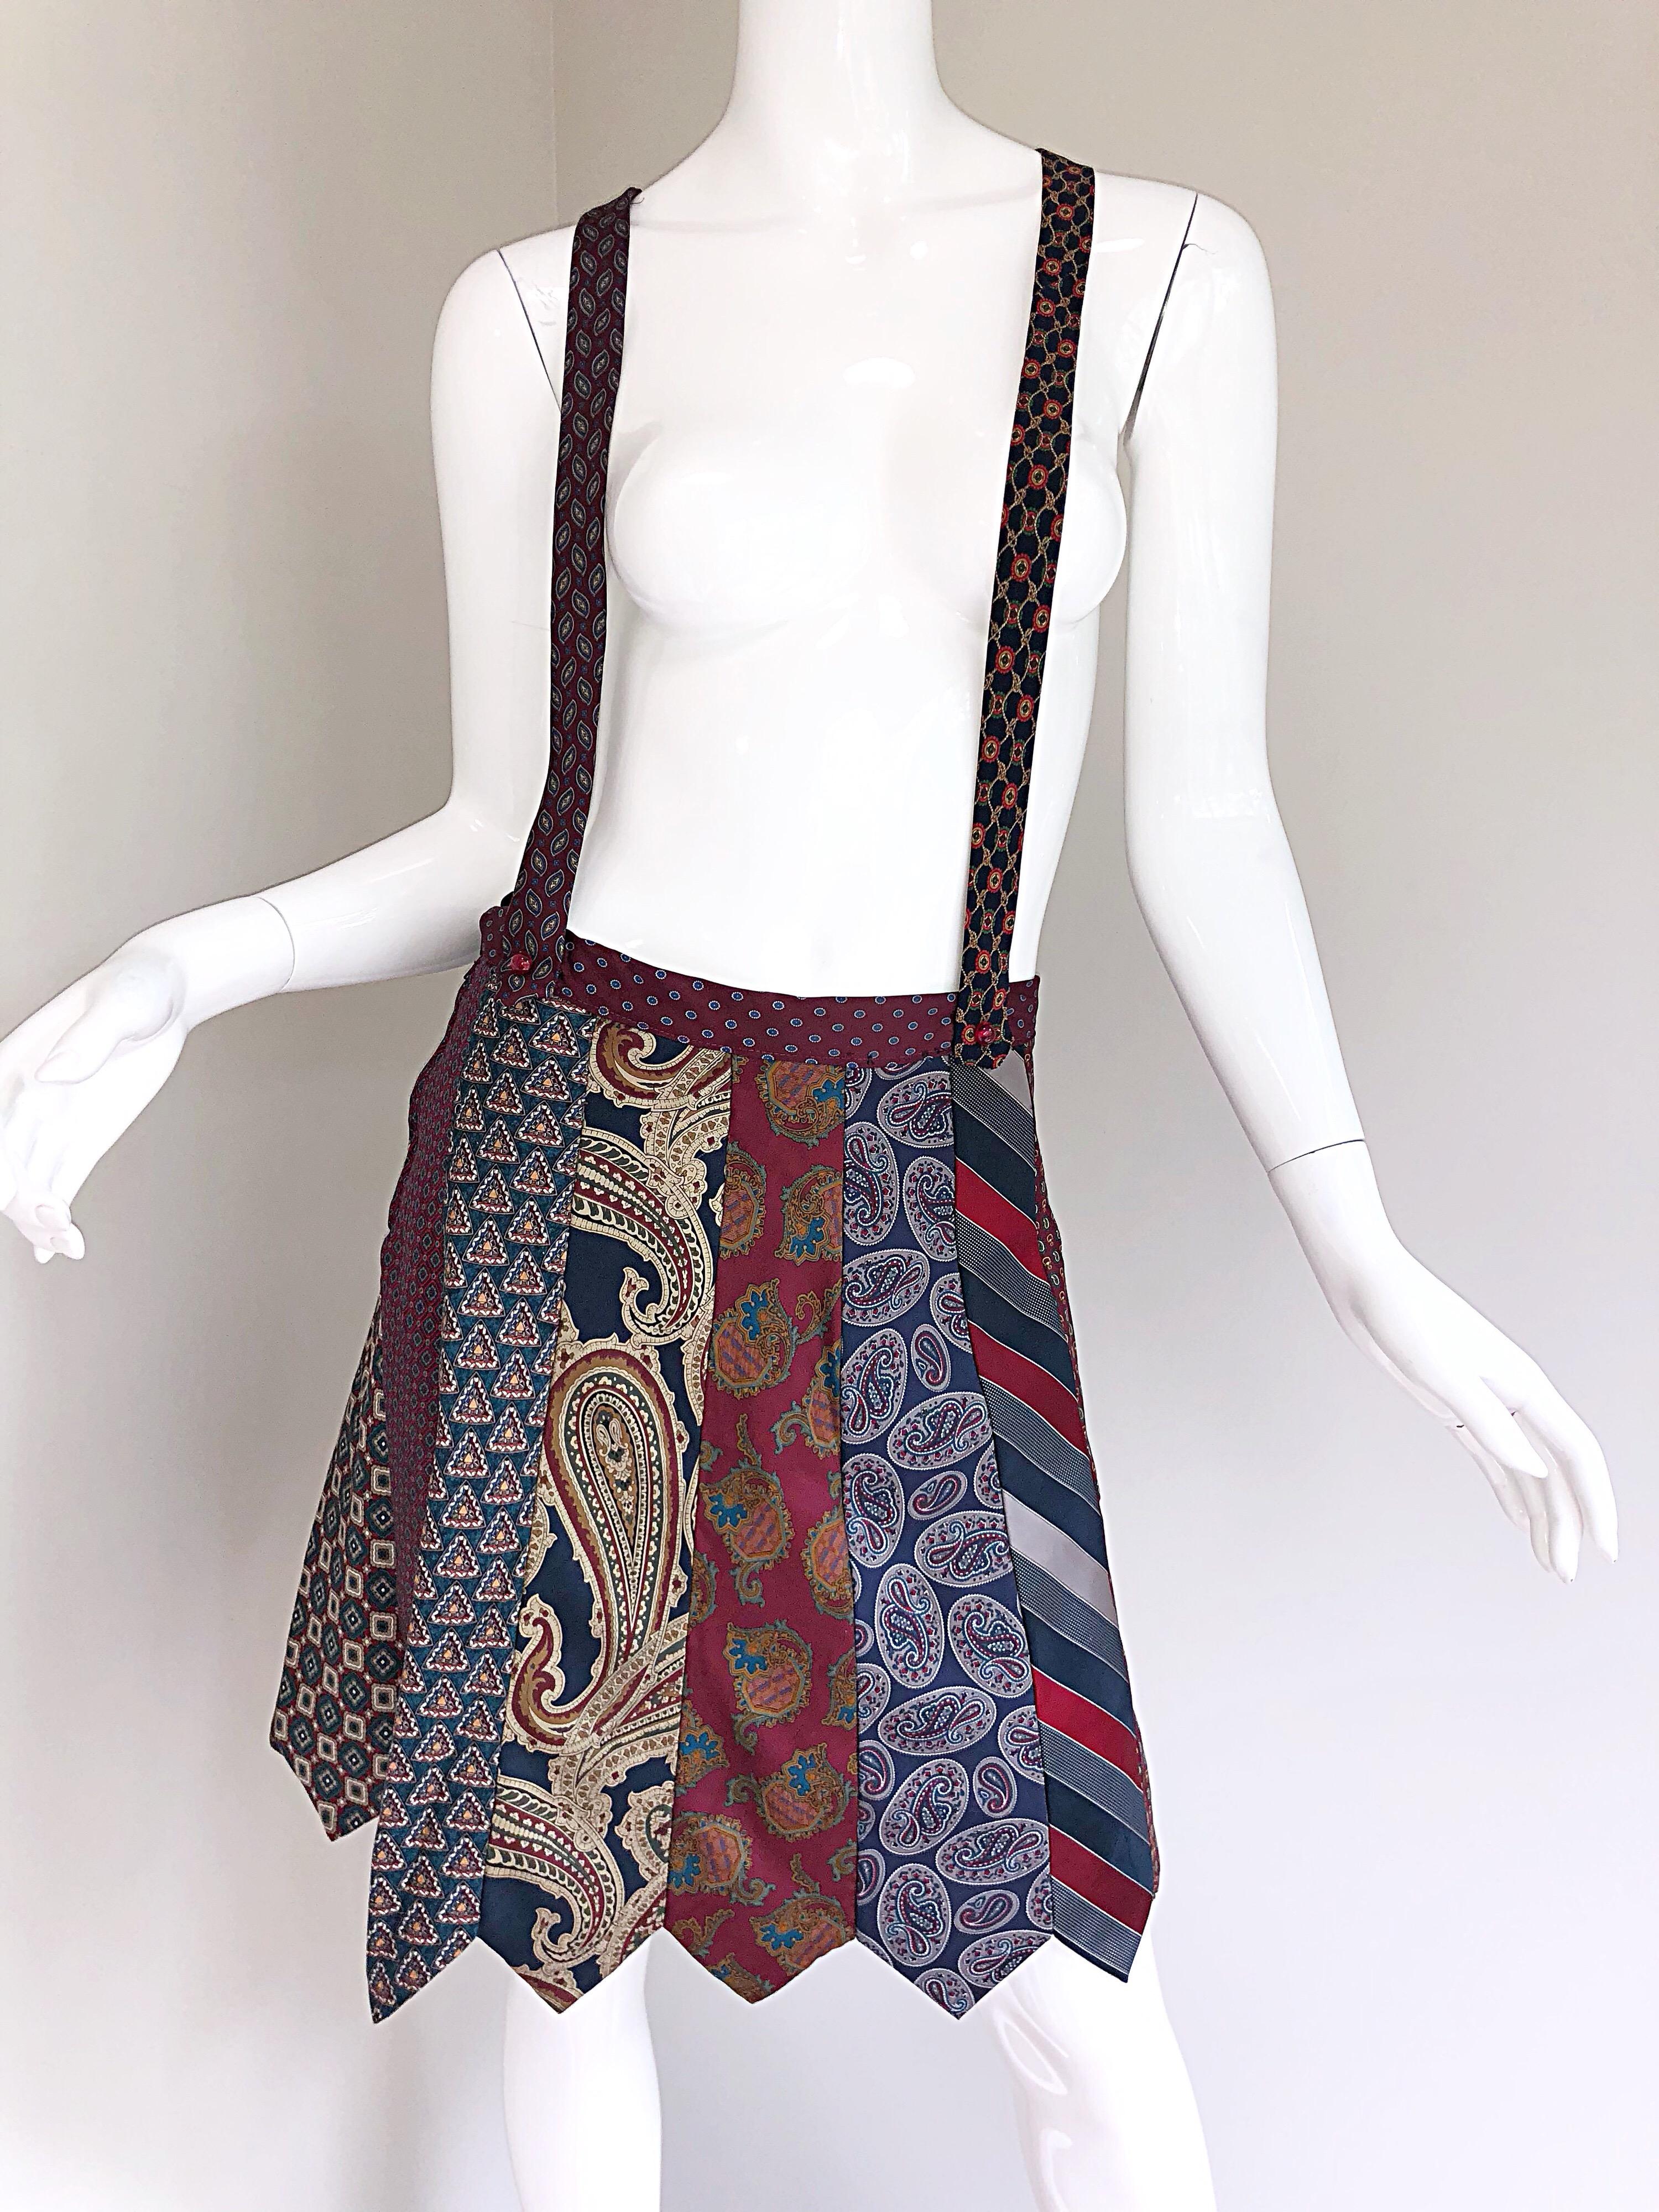 Incredible vintage skirt made entirely of vintage silk neck ties! Features paisley, polka dots, stripes etc. on each tie. Attached suspenders with a racerback. Sits low on the waist. Buttons at side waist. A real statement maker! Very well made,